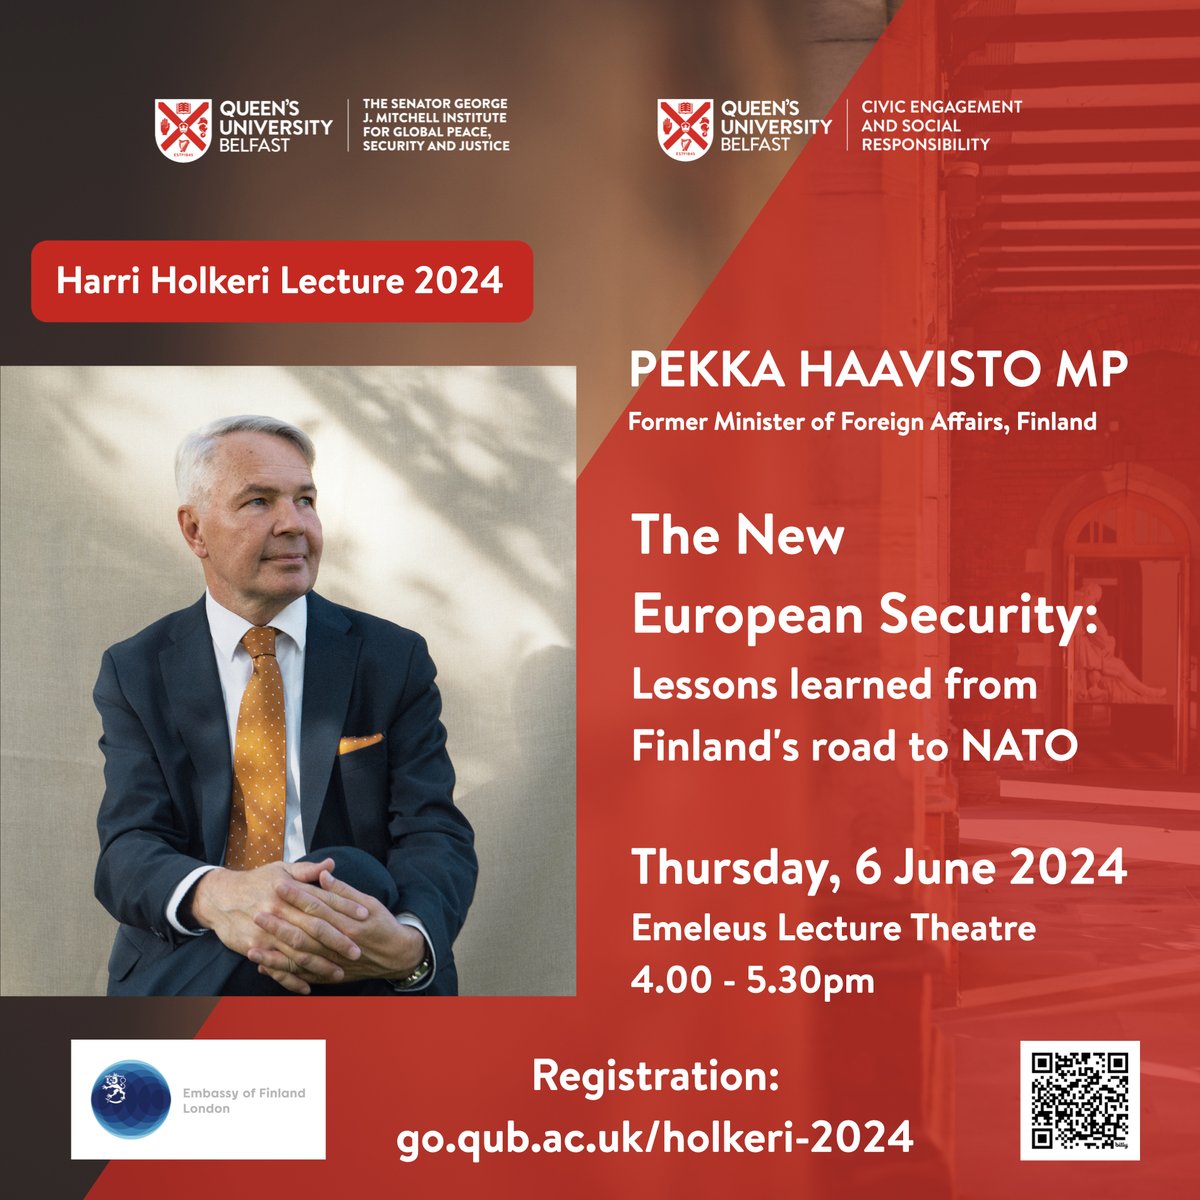 Join us for this year’s Harri Holkeri Lecture from Mr Pekka Haavisto MP, speaking on “The New European Security: Lessons learned from Finland's road to NATO”. Thur 06.06.2024 4.00-5.30 Emeleus Lecture Theatre REGISTRATION: go.qub.ac.uk/holkeri-2024